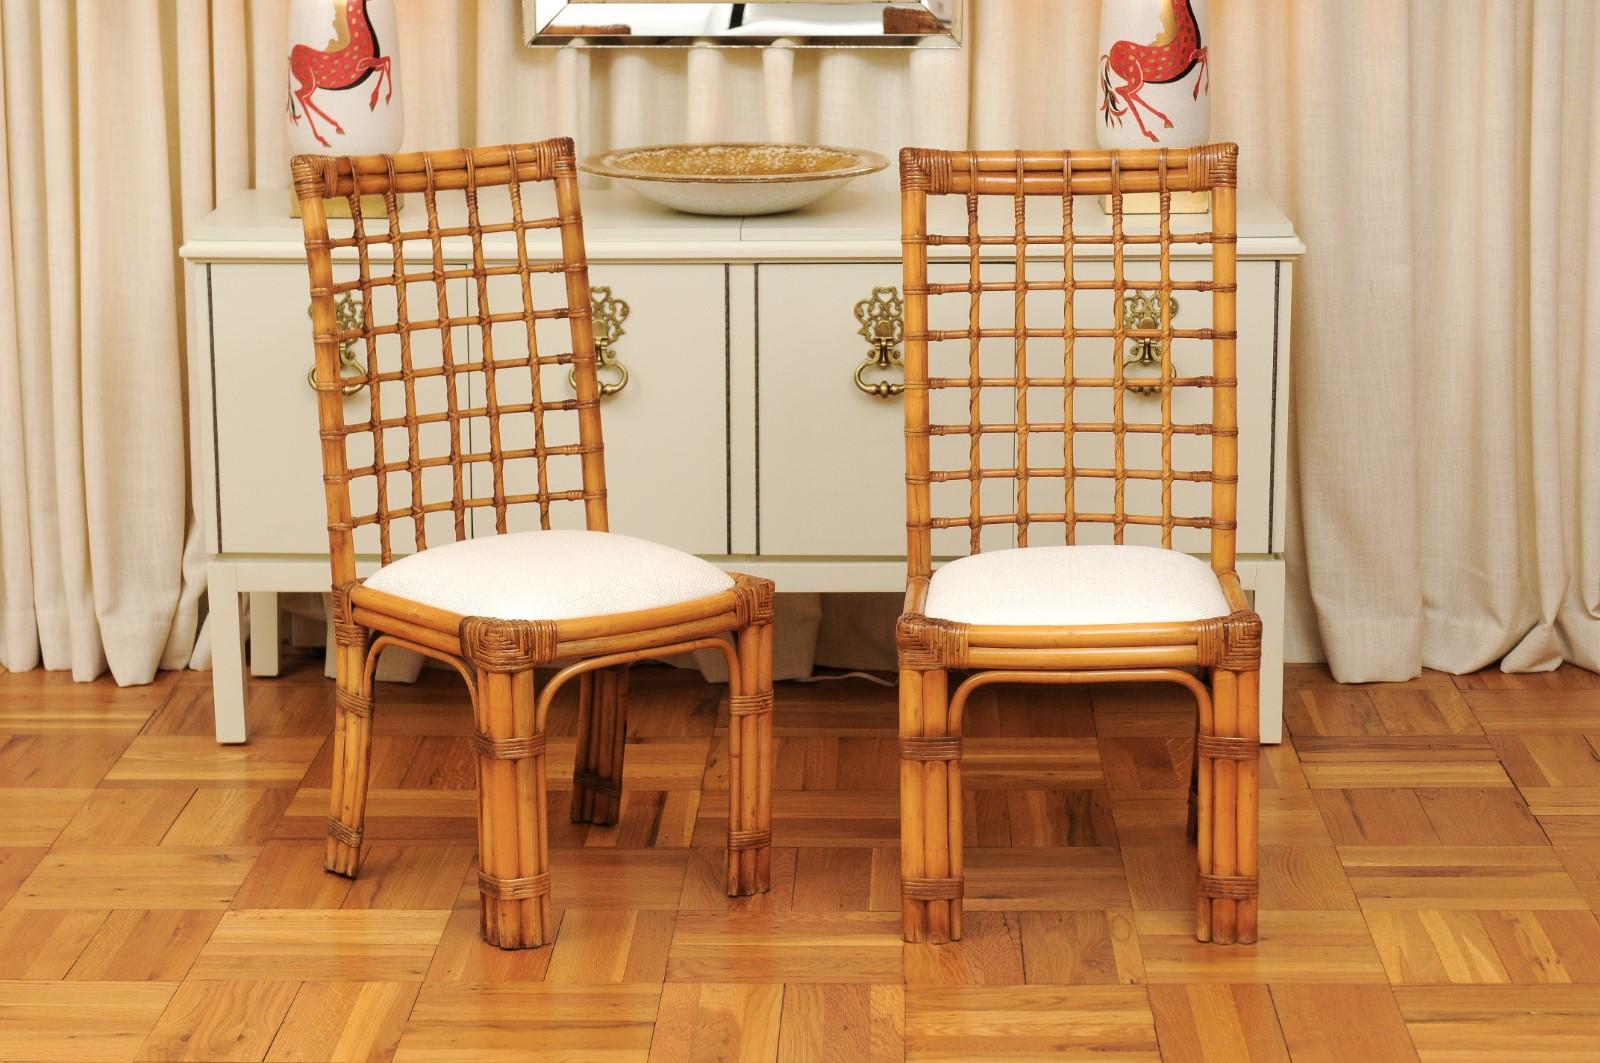 An exquisite and unique set of eight (8) high-back dining chairs by the esteemed Henry Olko for his Willow and Reed firm, circa 1979. These rare chairs are from the Olko's Square series. Stout and sturdy rattan and hardwood construction with